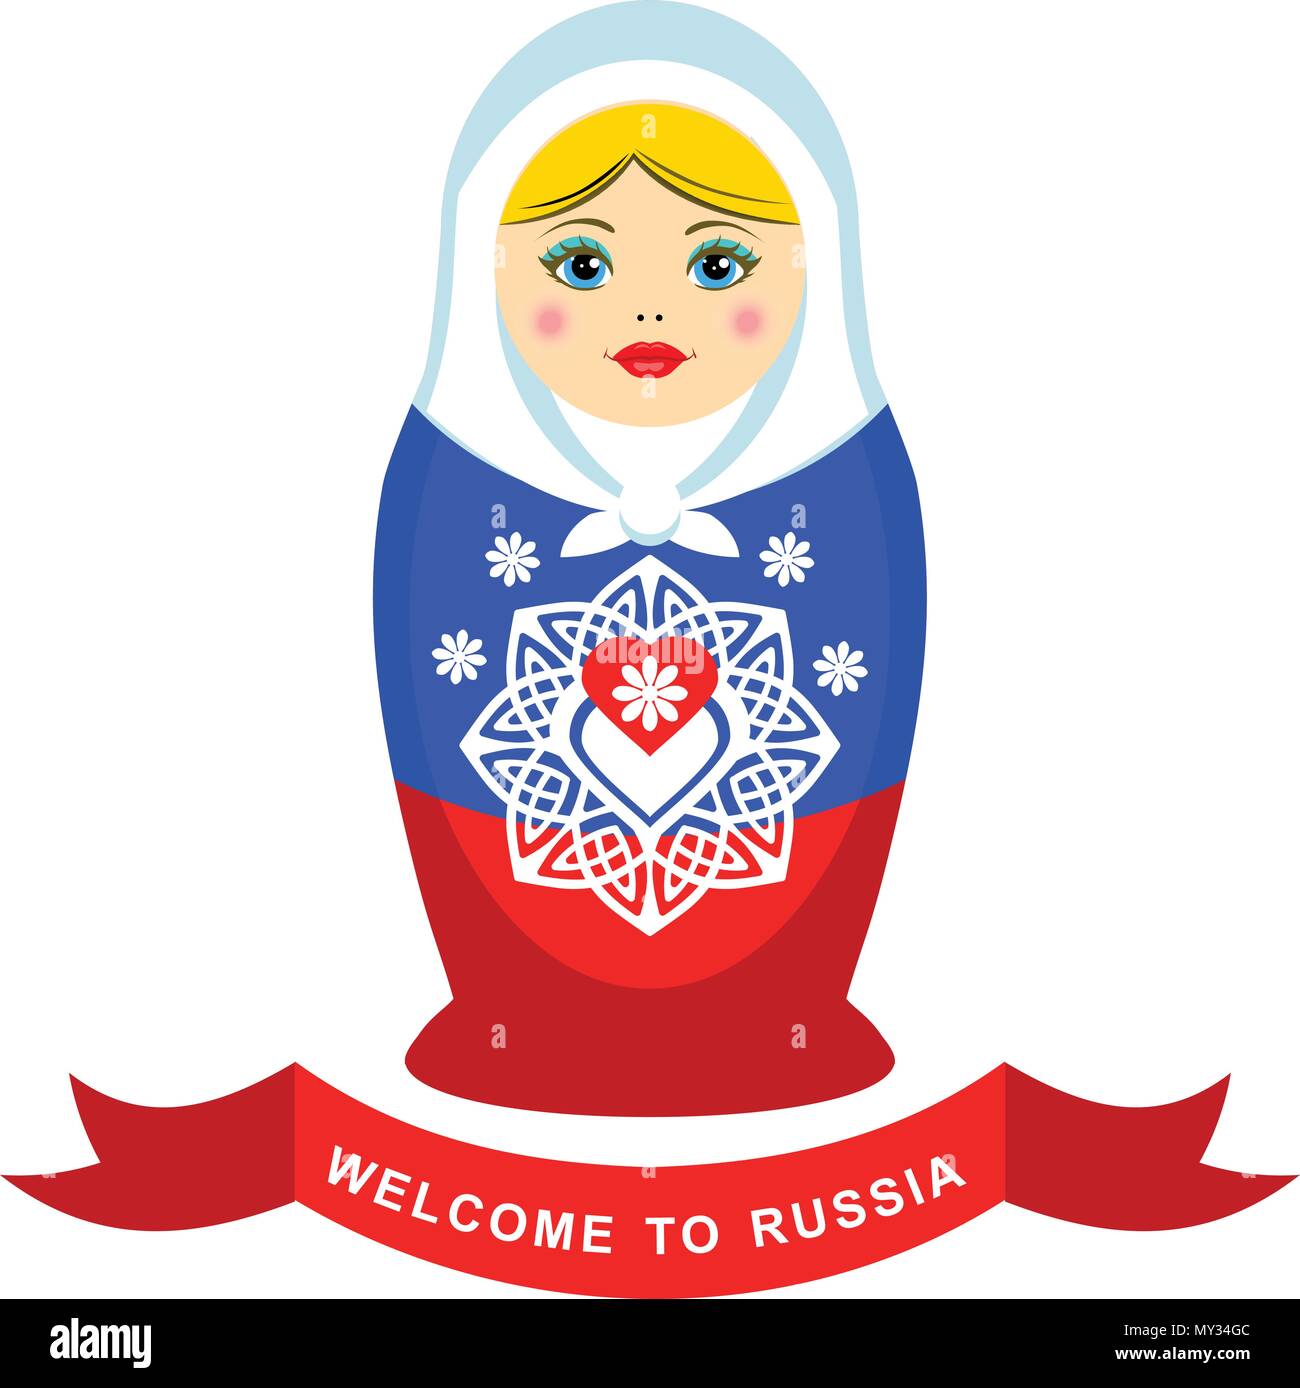 Russia country flag russian - Culture, Religion & Festivals Icons